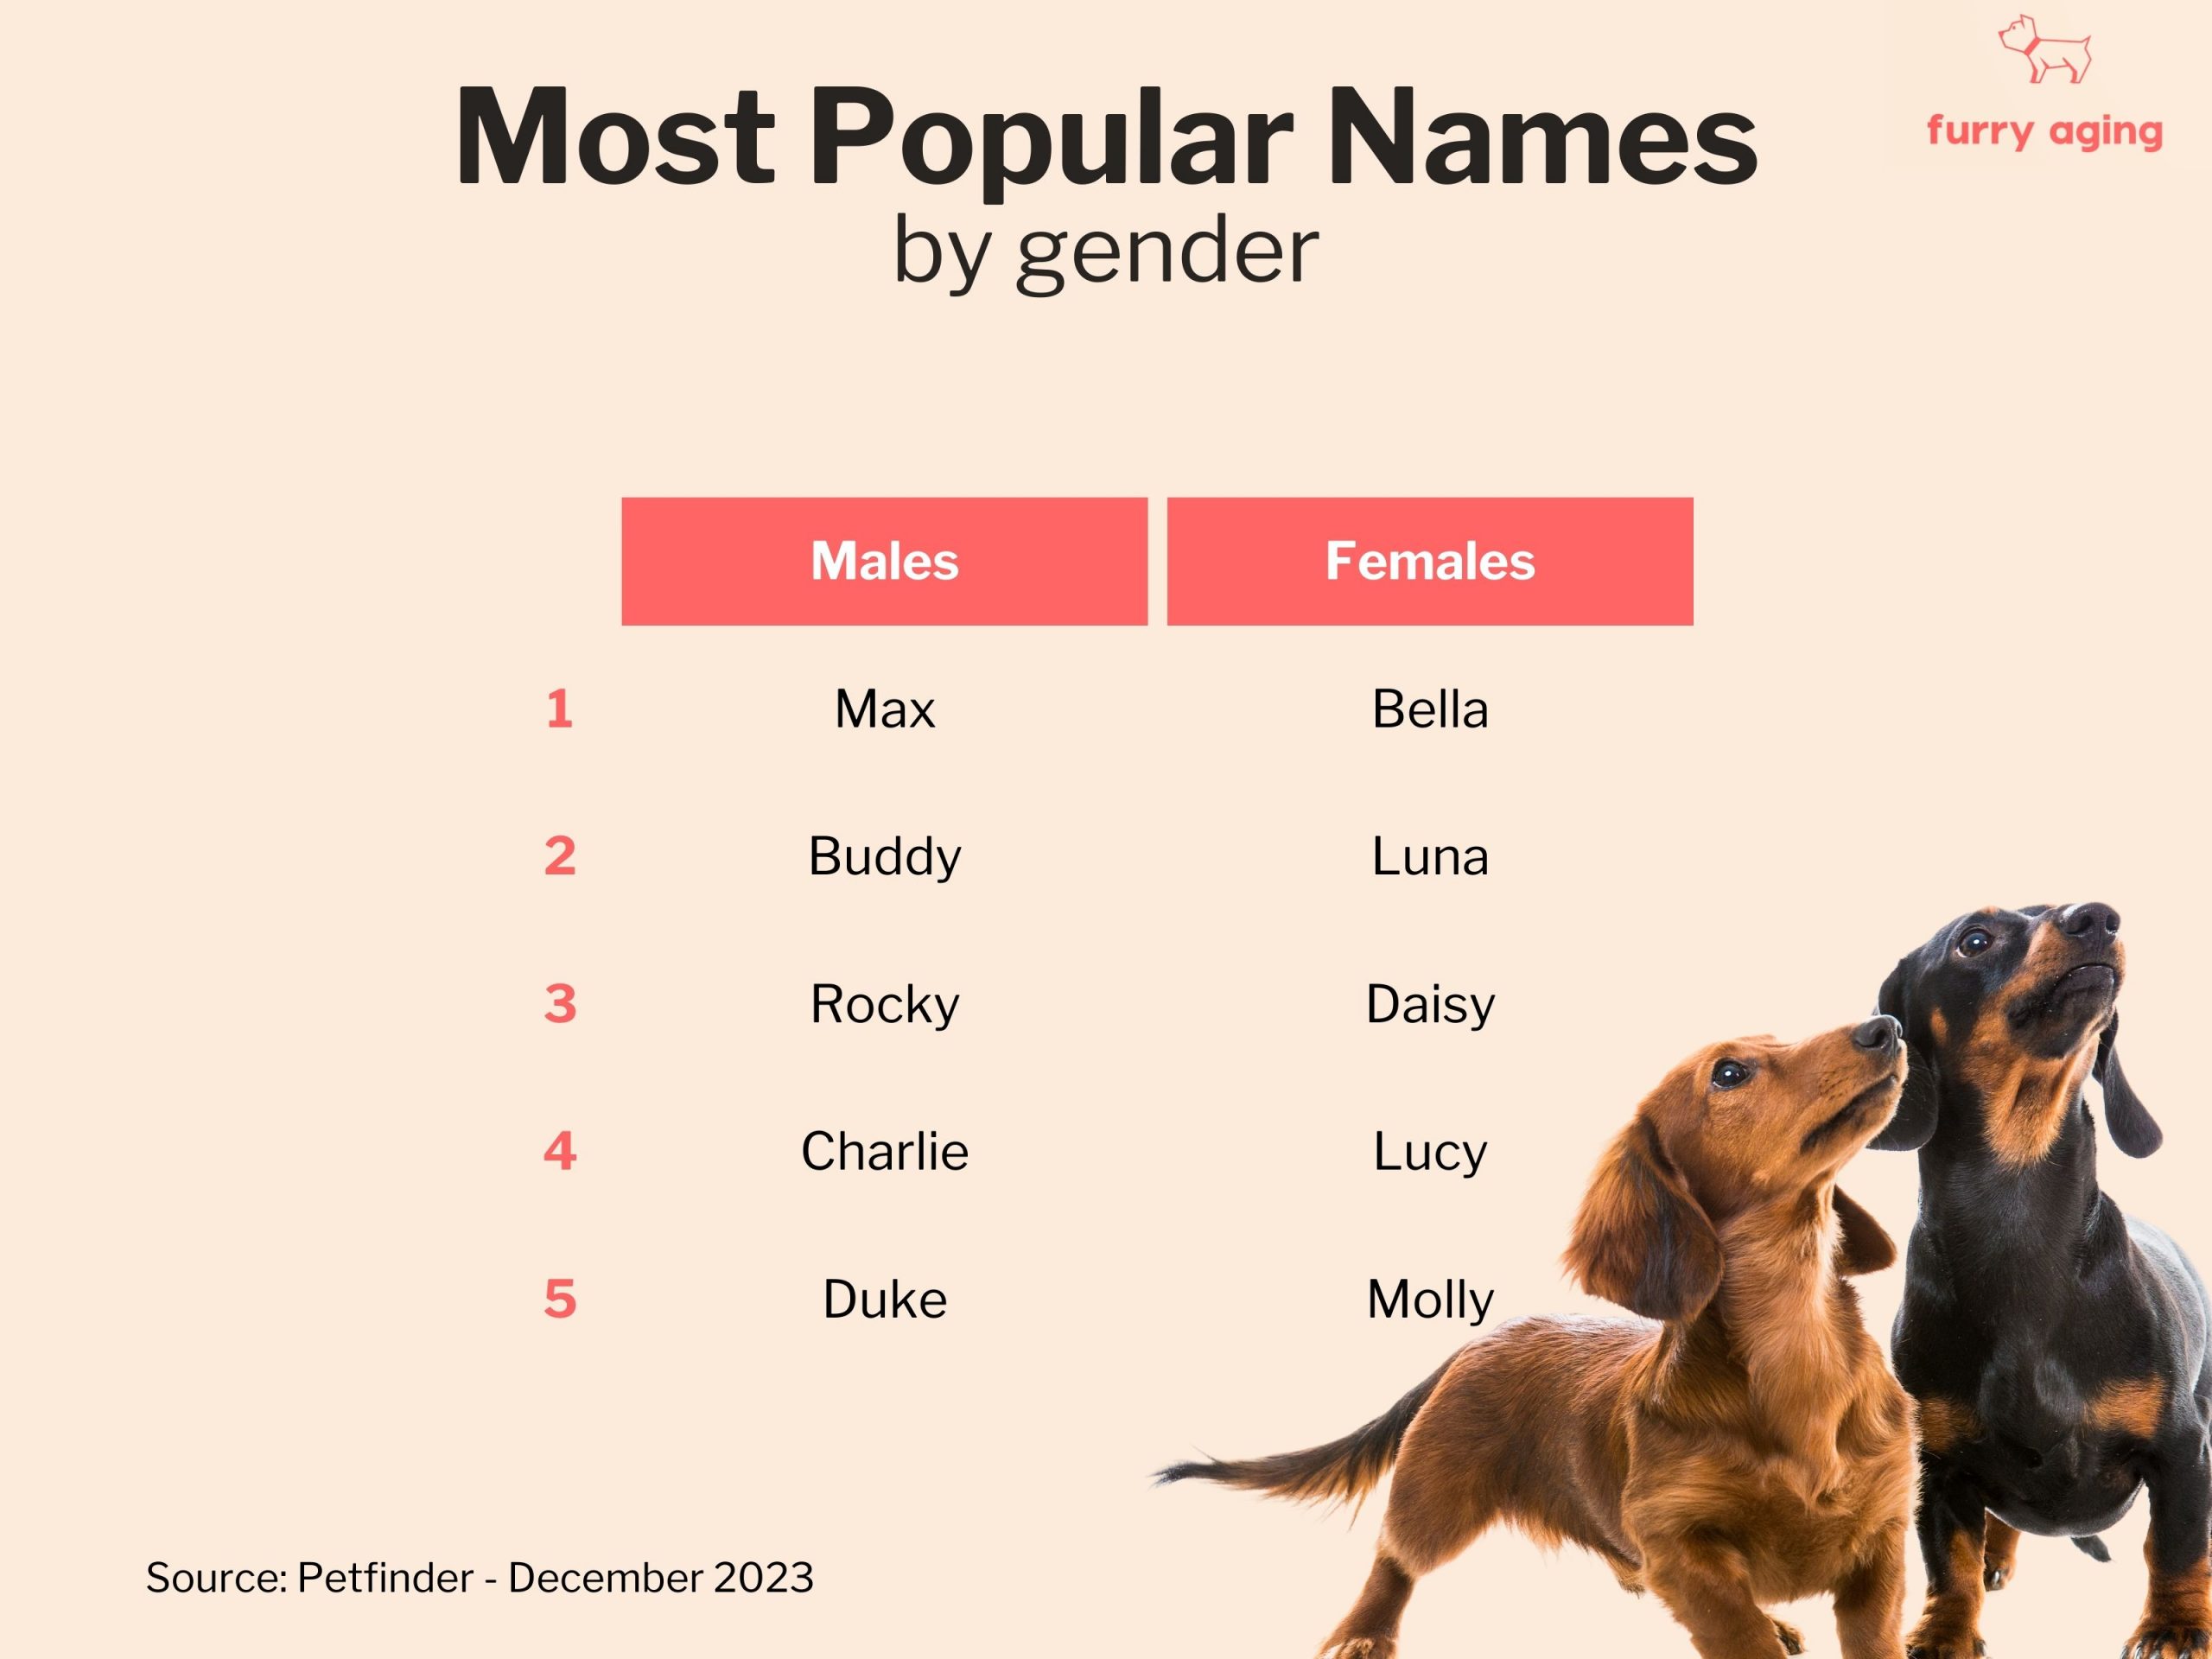 Most popular names by gender